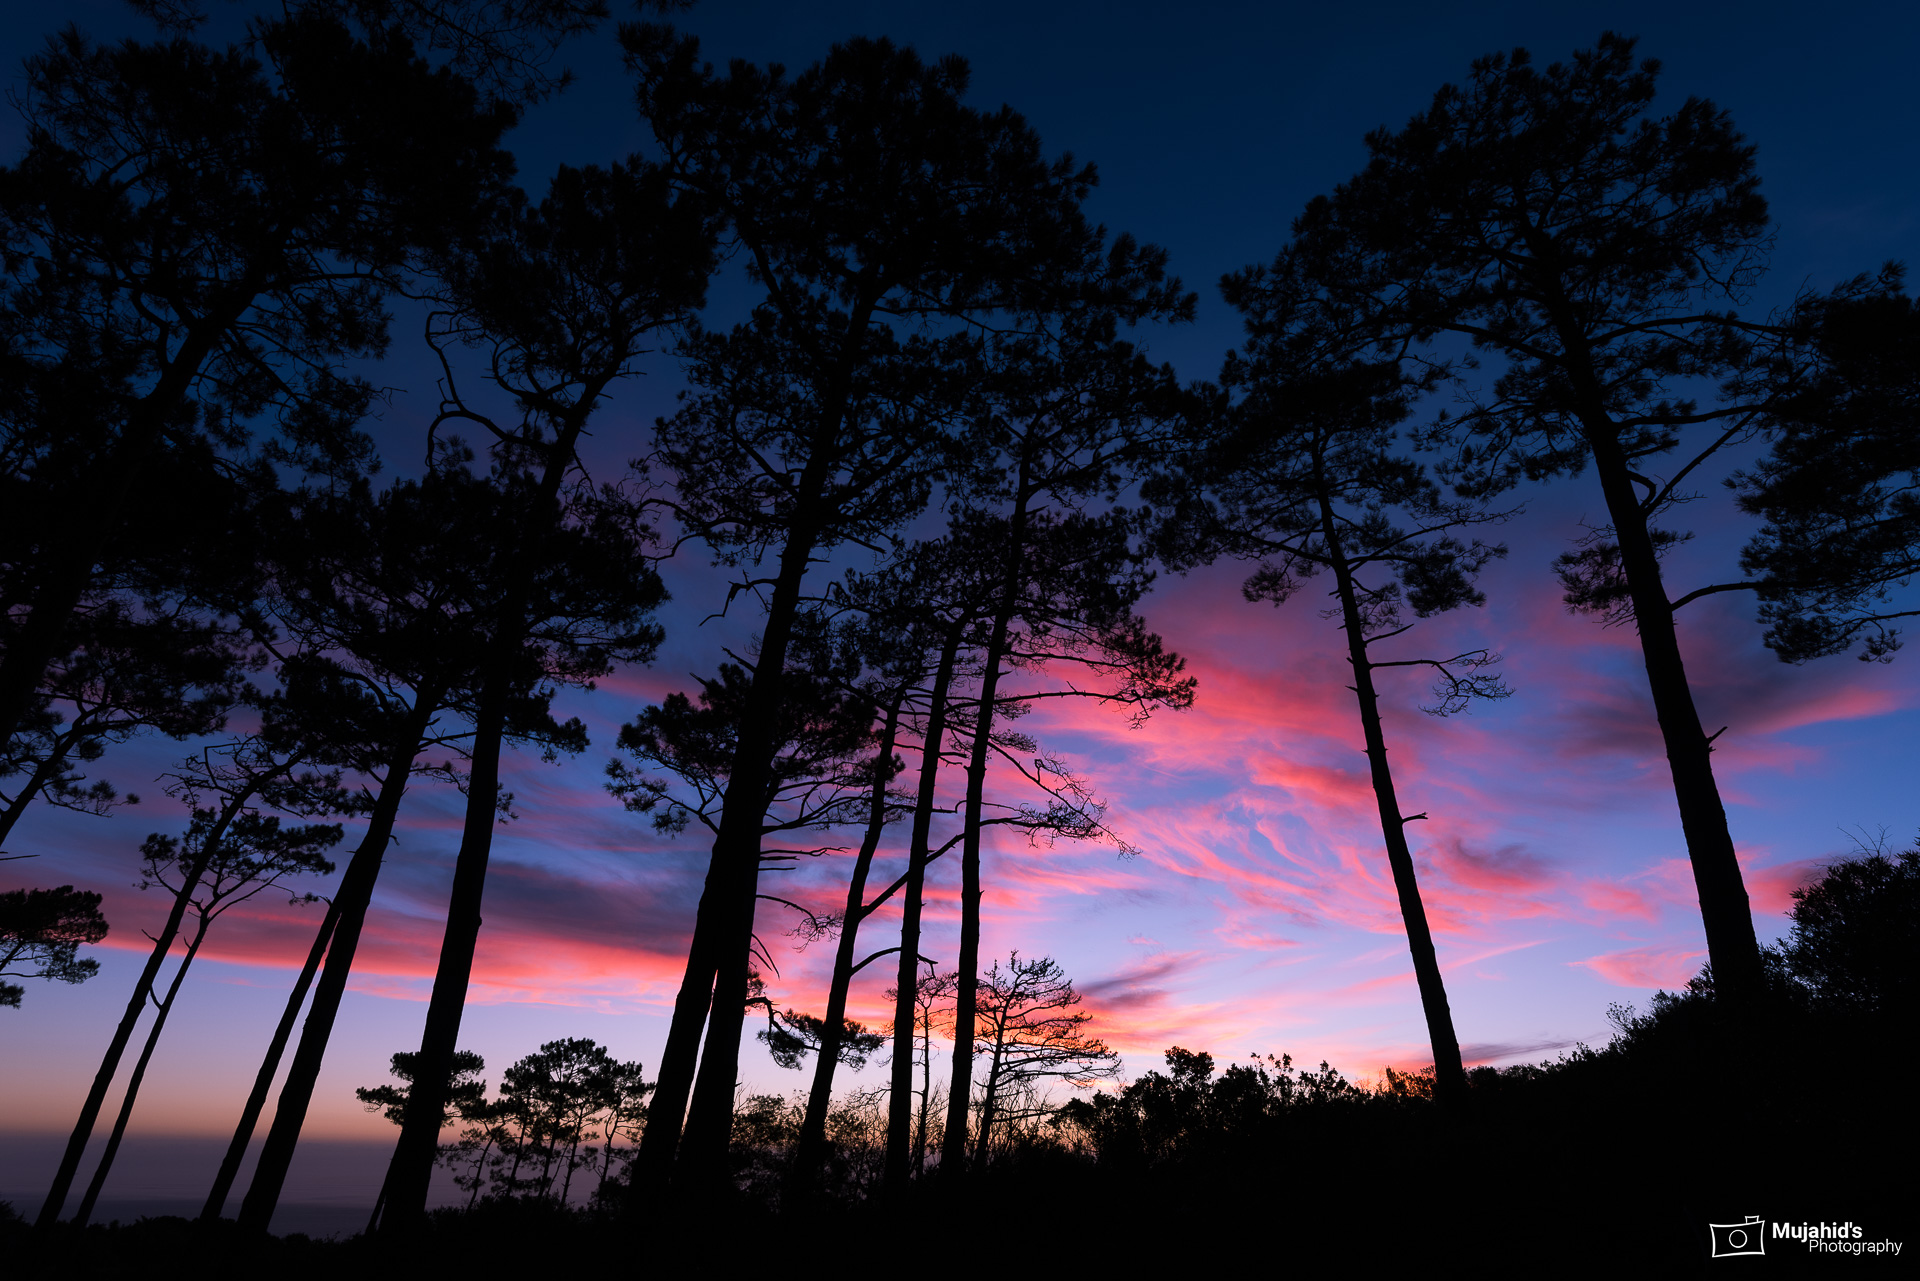 A Sunset in the Trees | Mujahid's Photography